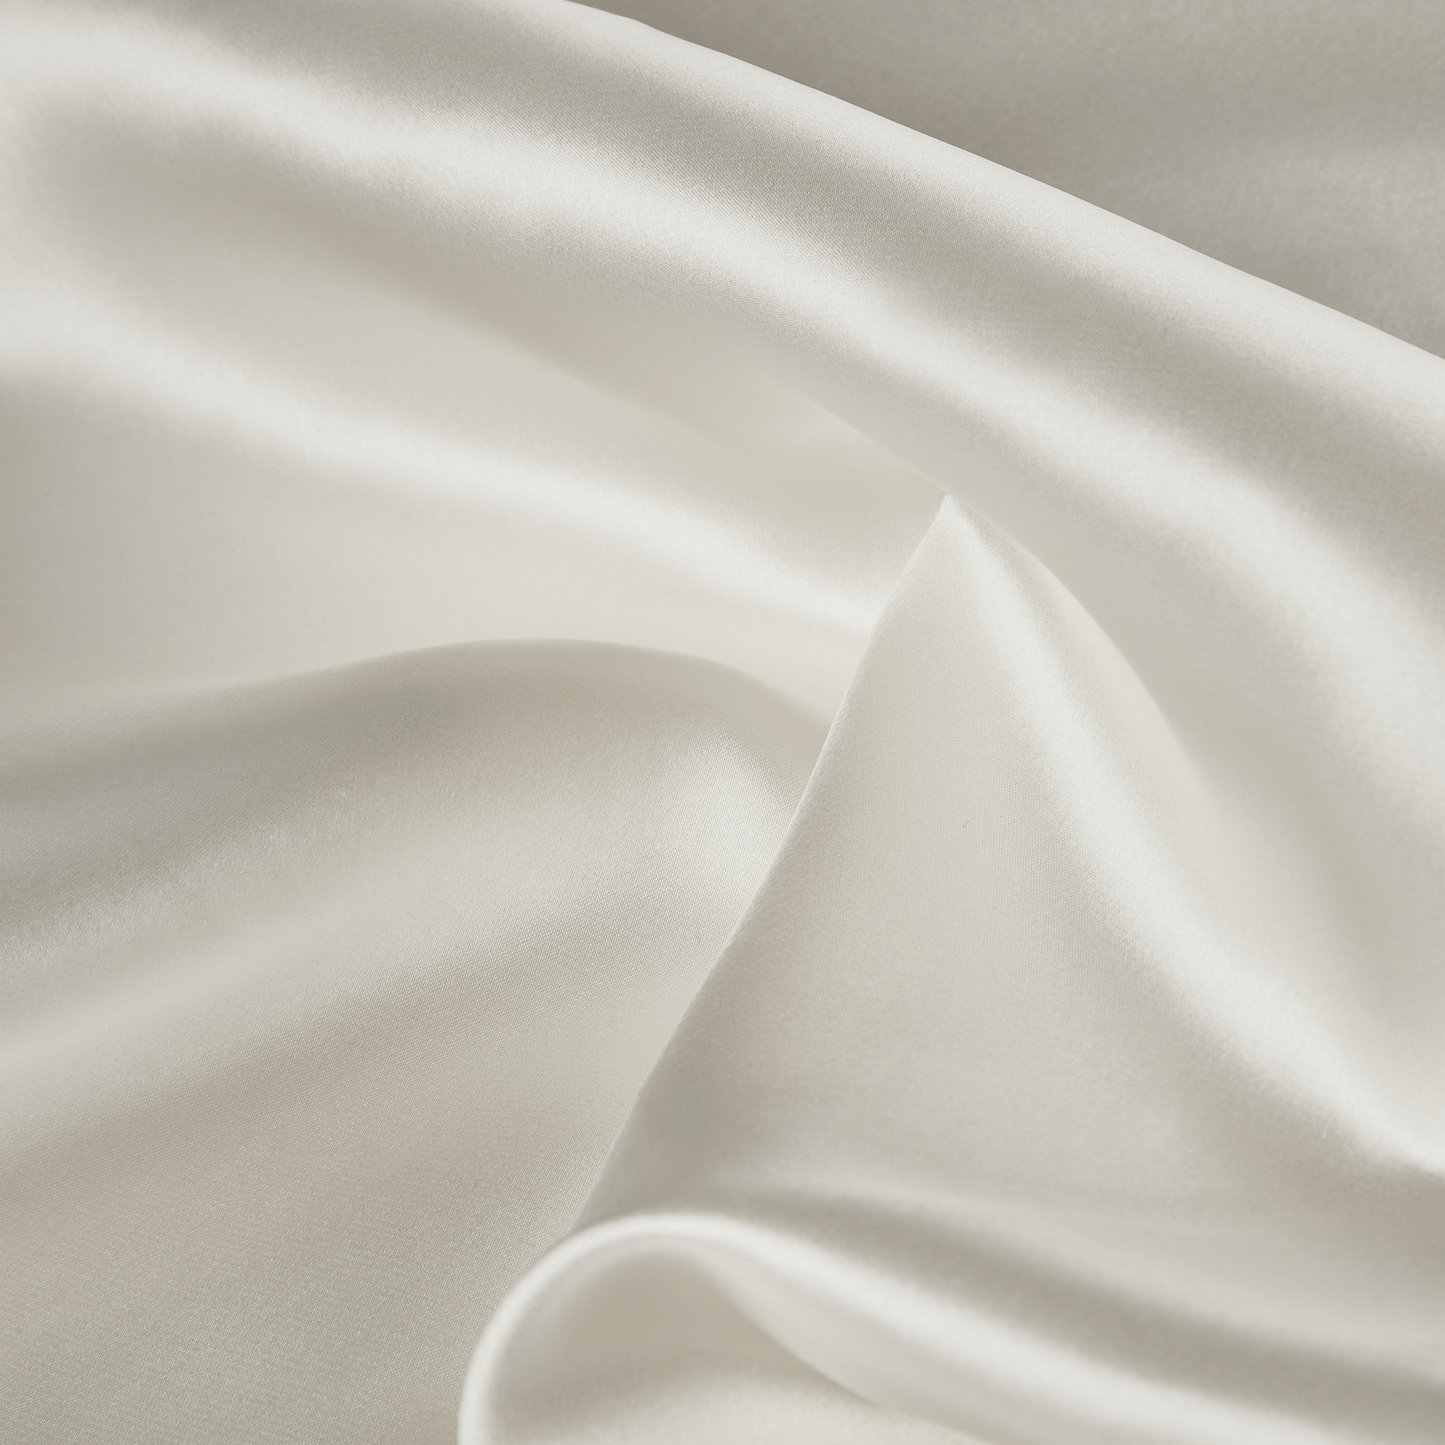 Pillowcase made from the highest quality 100% mulberry silk with a thickness of 22 momme